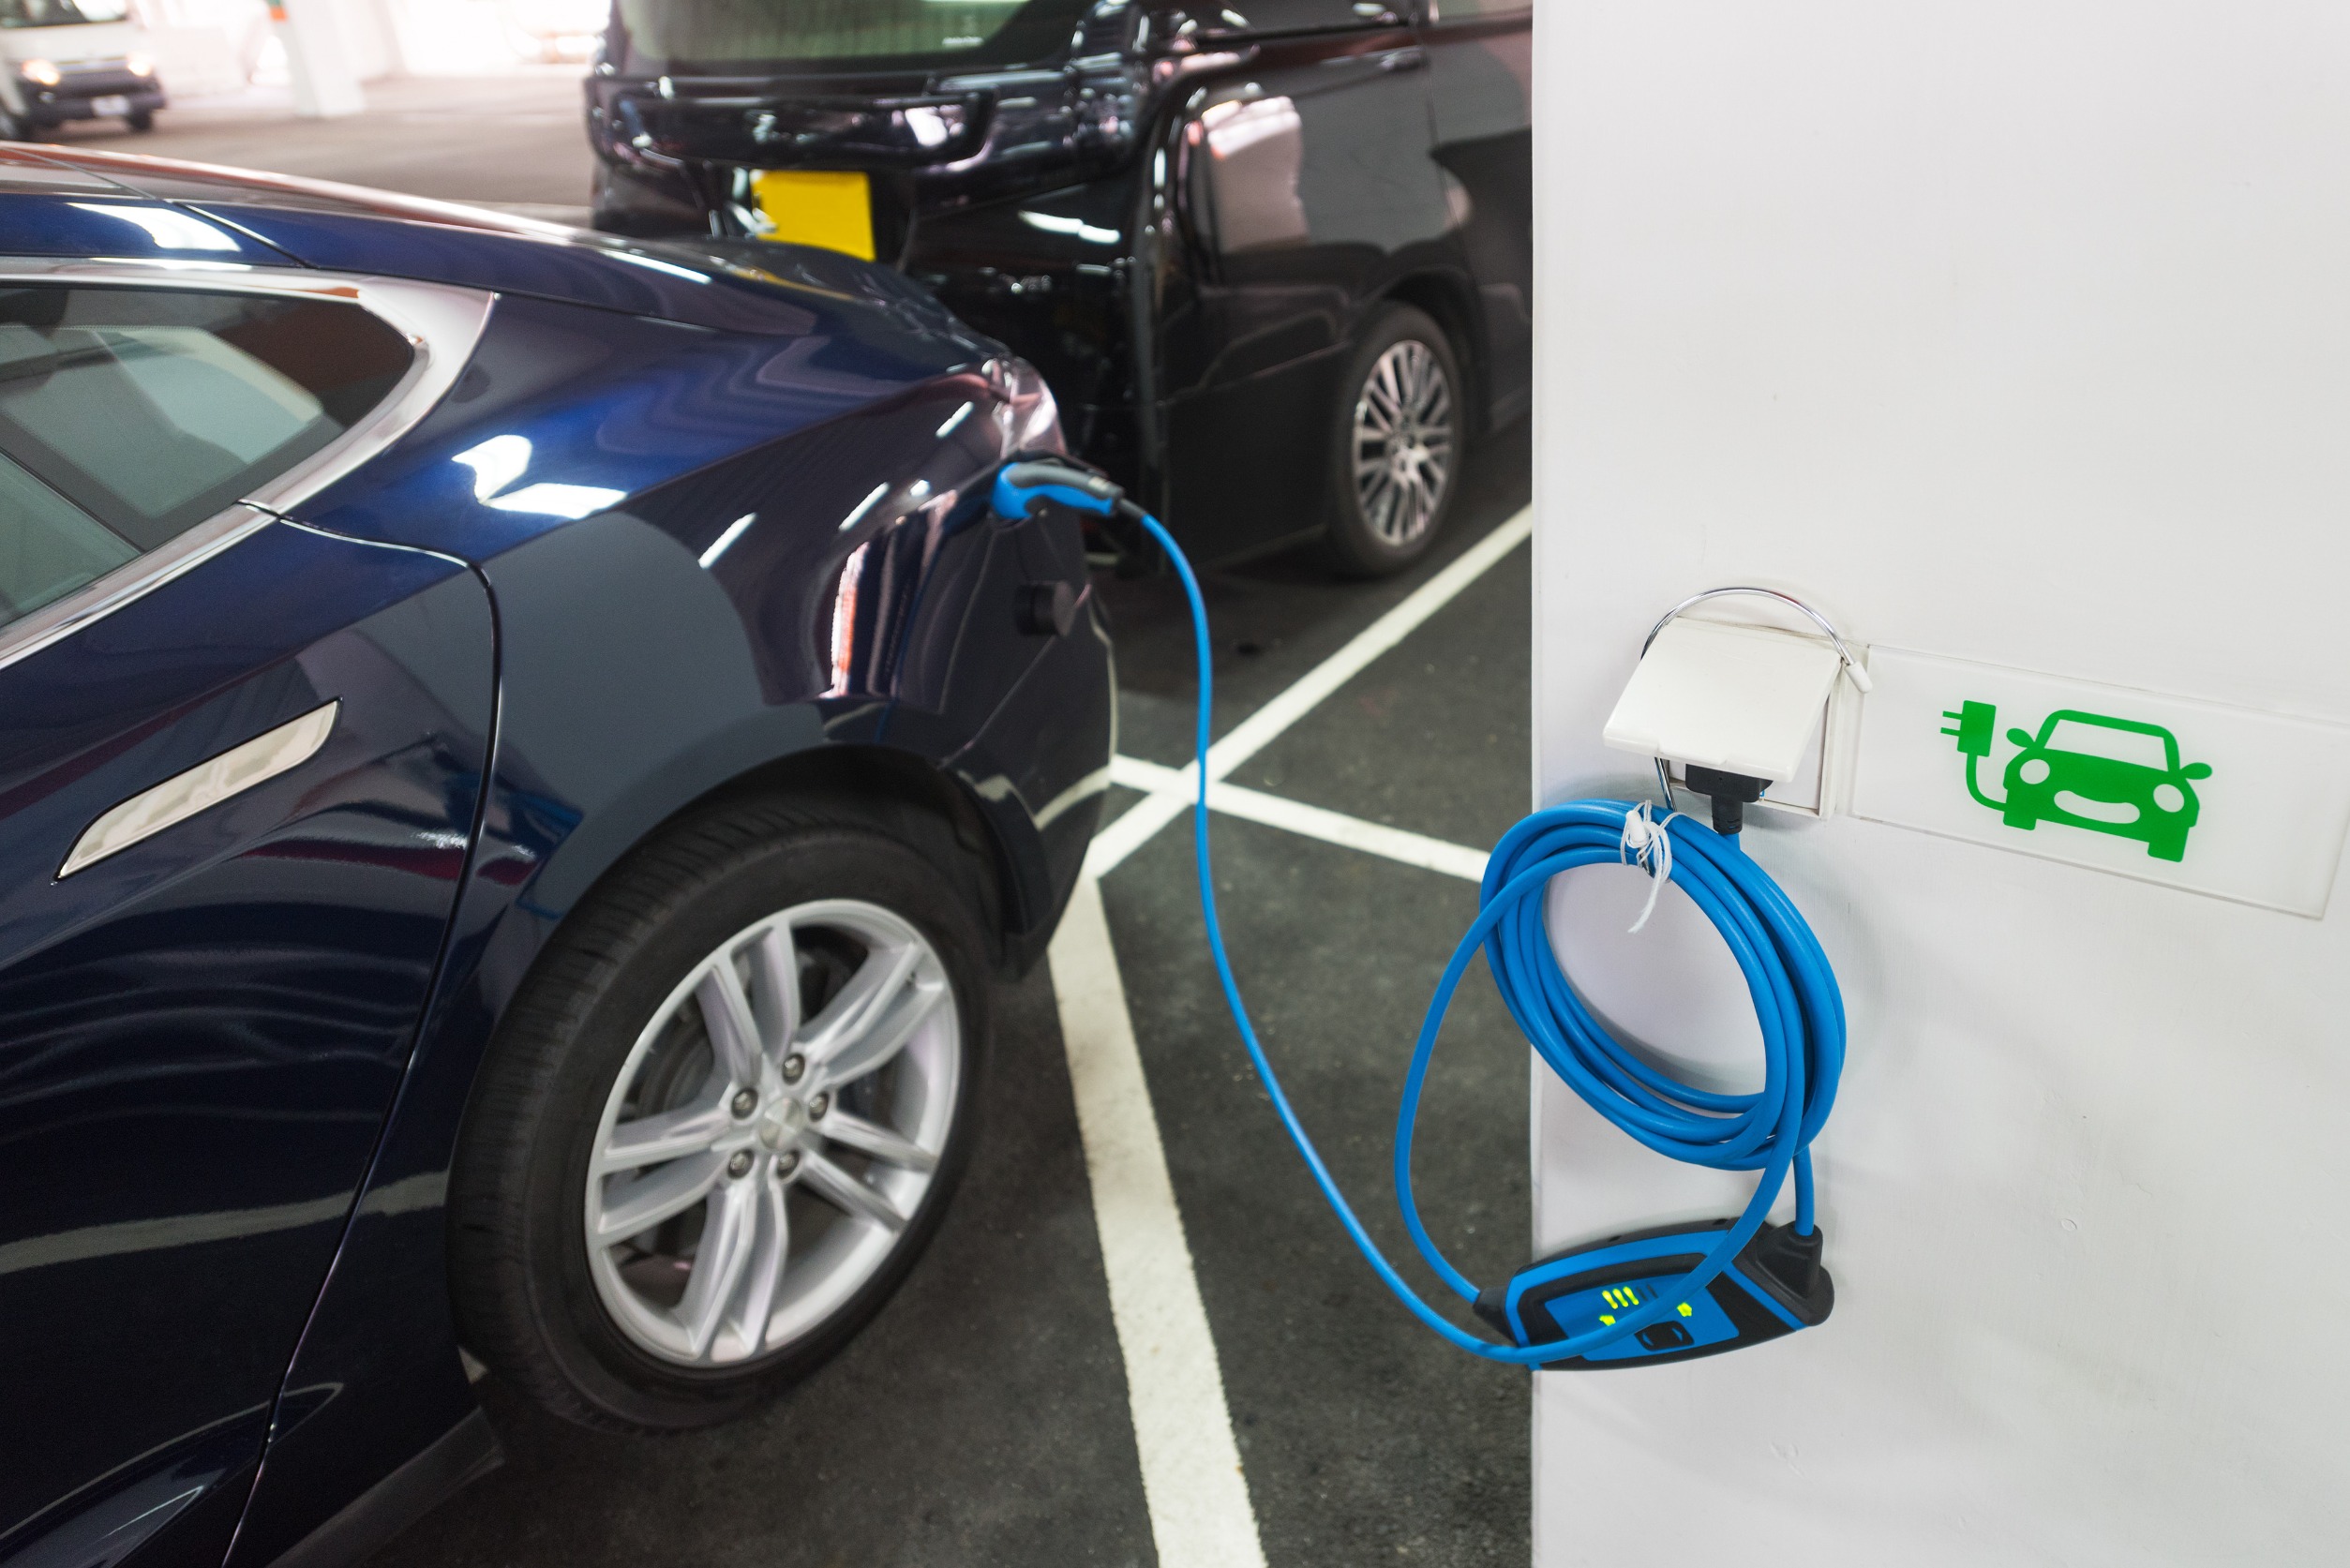 <p> The EV industry is working hard to build confidence among potential buyers. Policies that restrict charging capacity send mixed messages, suggesting that current infrastructure may not be adequate to support all driving needs. This contradiction can undermine consumer trust in EV technology. </p> :: Pexels